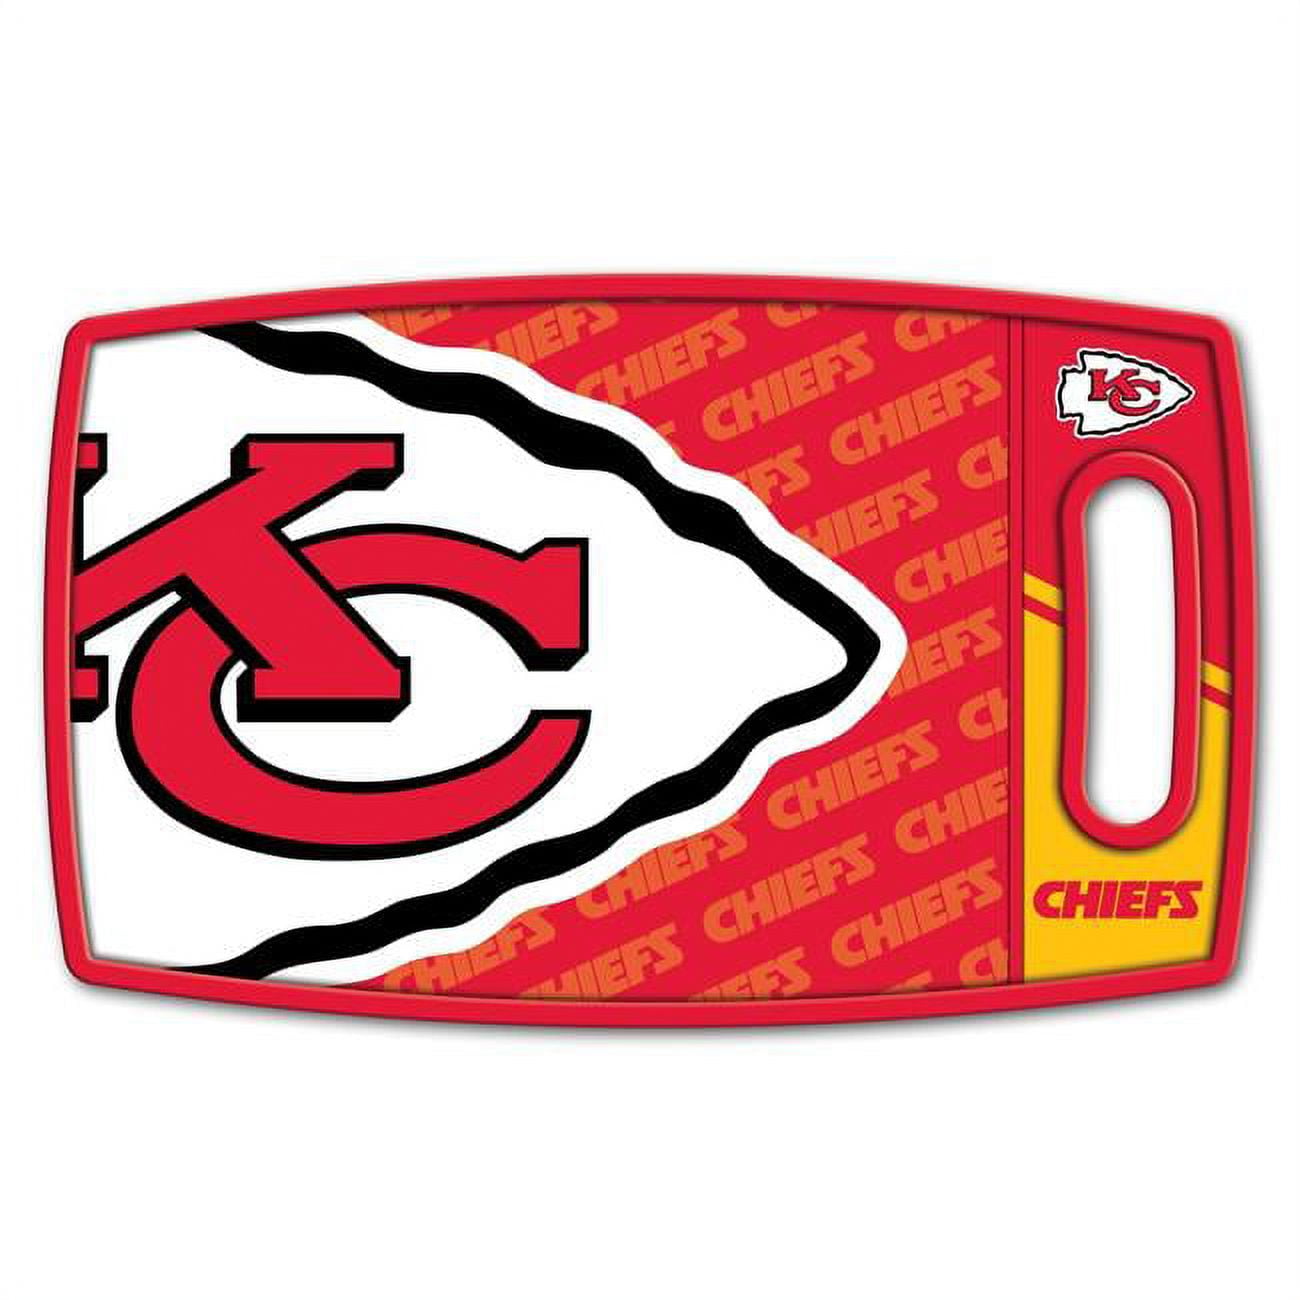 14.5" x 9" NFL Teams Cutting Board (Various Teams) from $8.15 + Free Shipping w/ Walmart+ or $35+